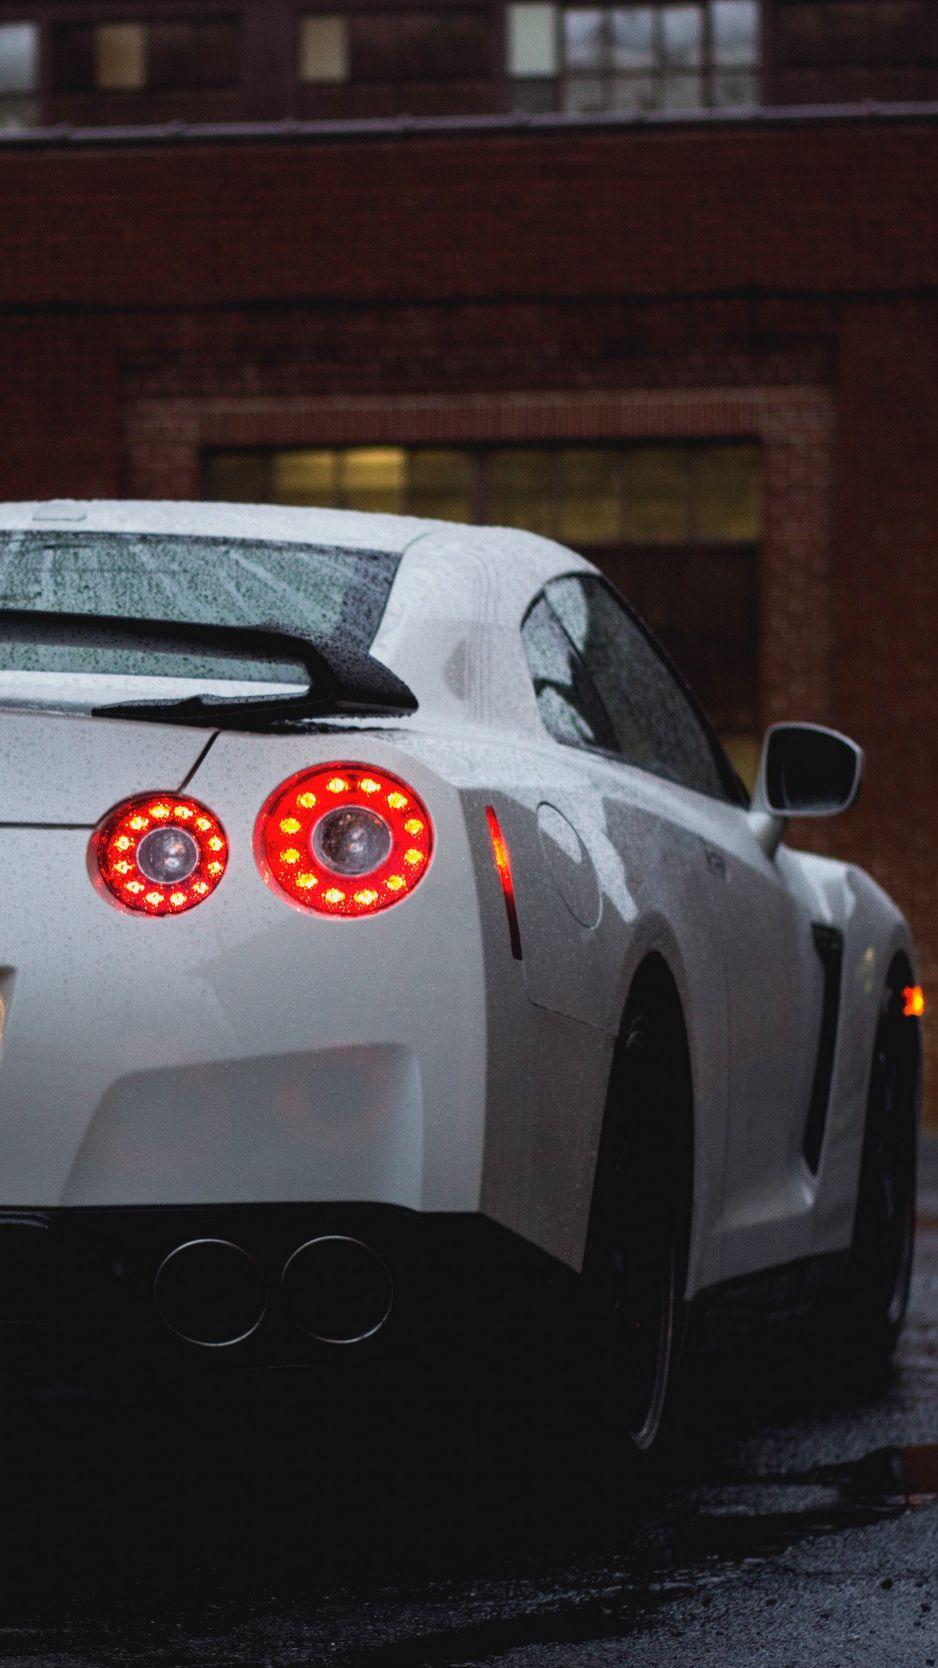 Gtr Iphone Wallpapers Top Free Gtr Iphone Backgrounds